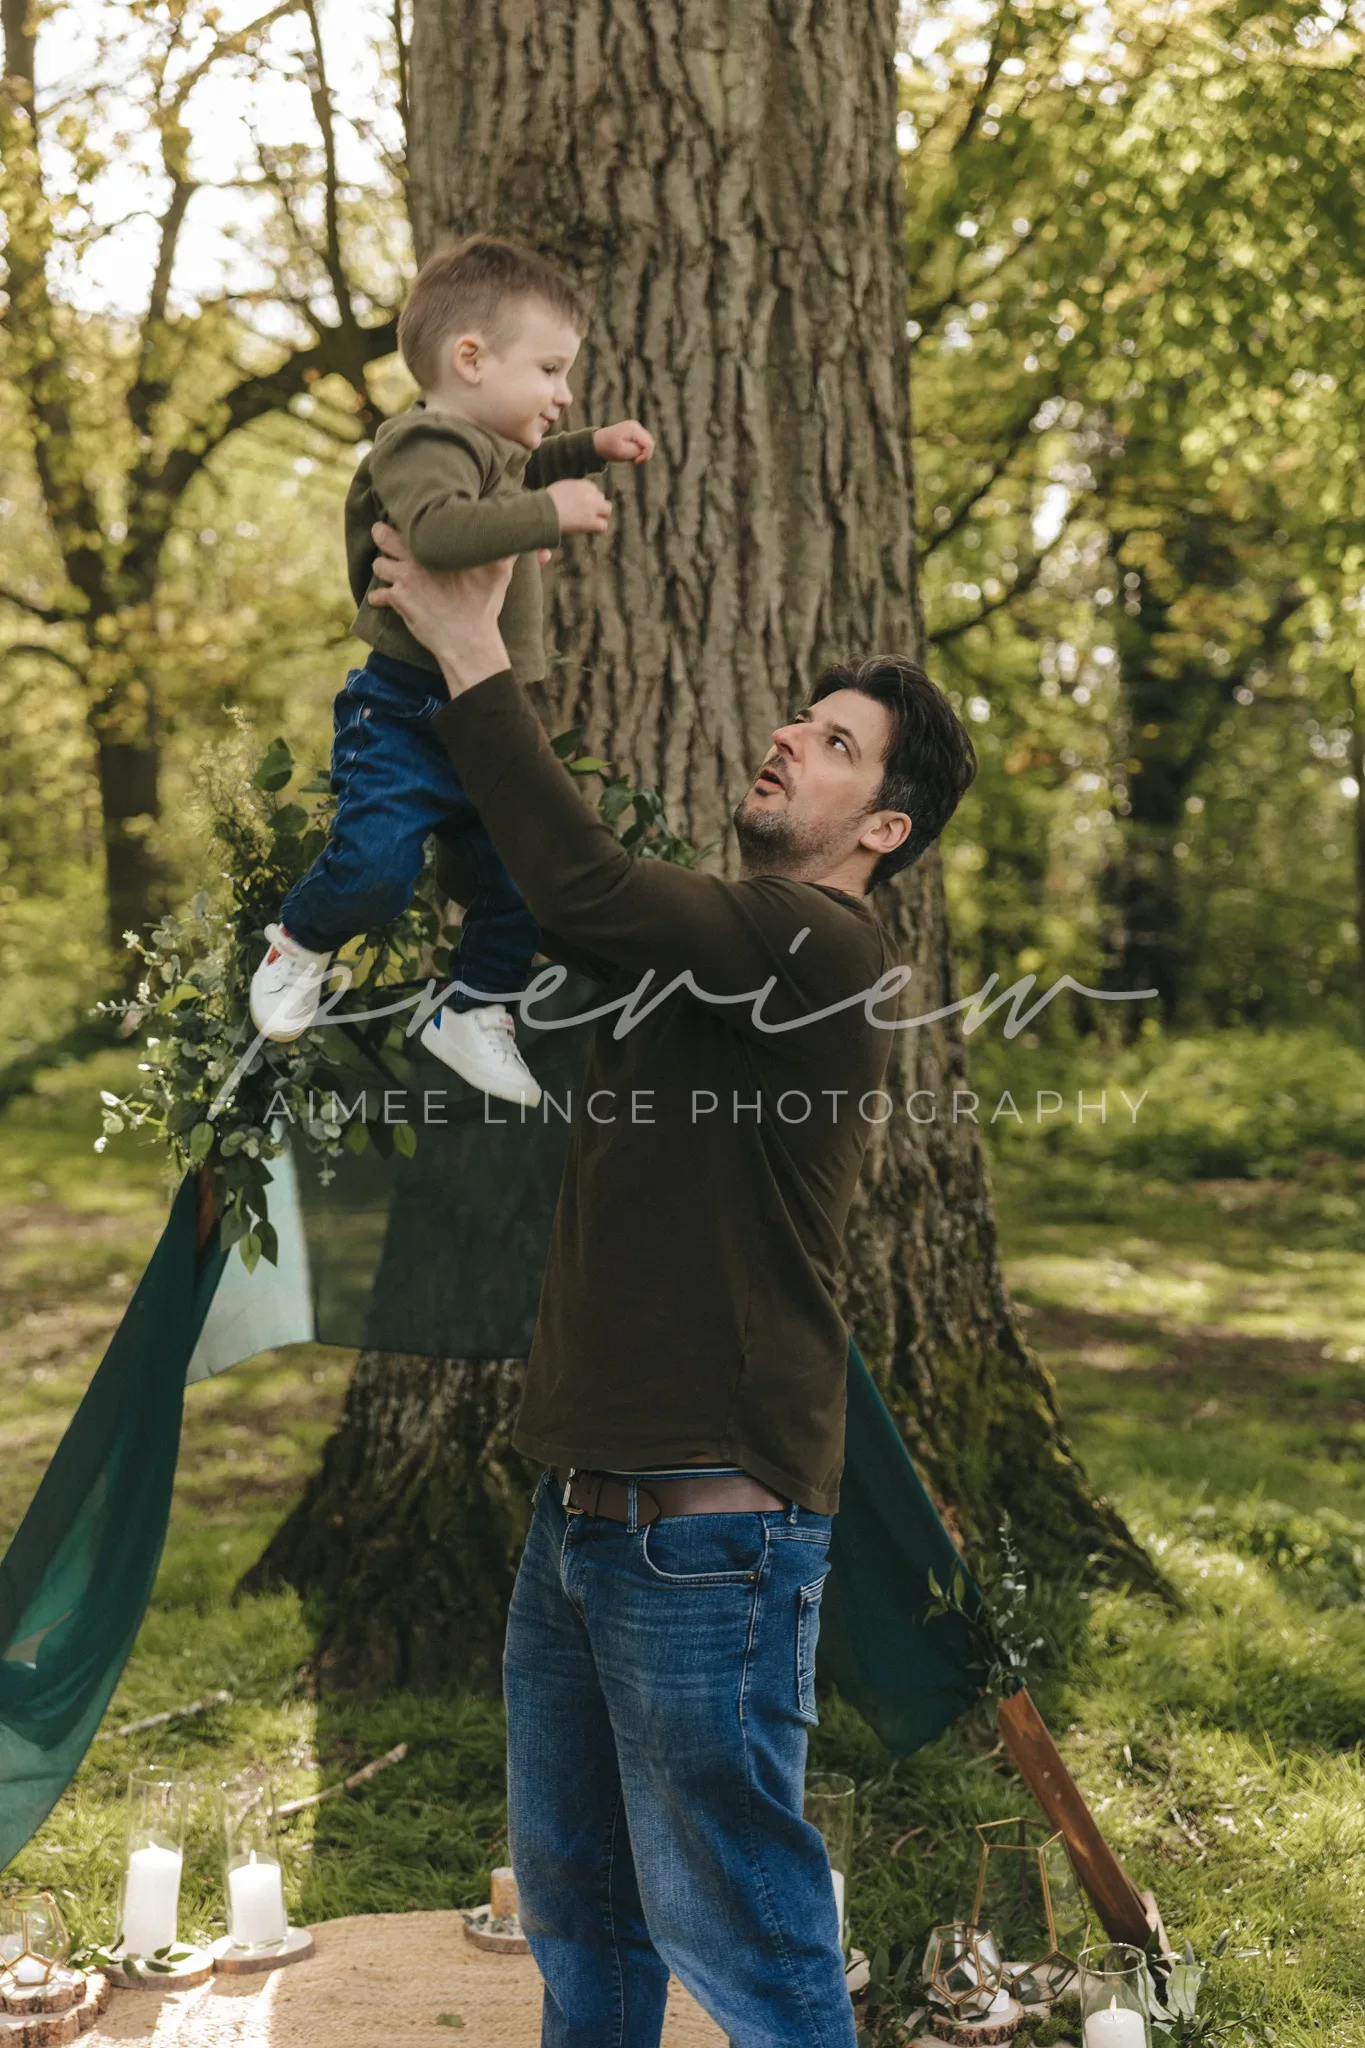 A man lifts a toddler high in his arms outdoors, both smiling, amidst large trees and soft sunlight. the setting includes some candles at their feet, adding a warm ambiance to the scene.